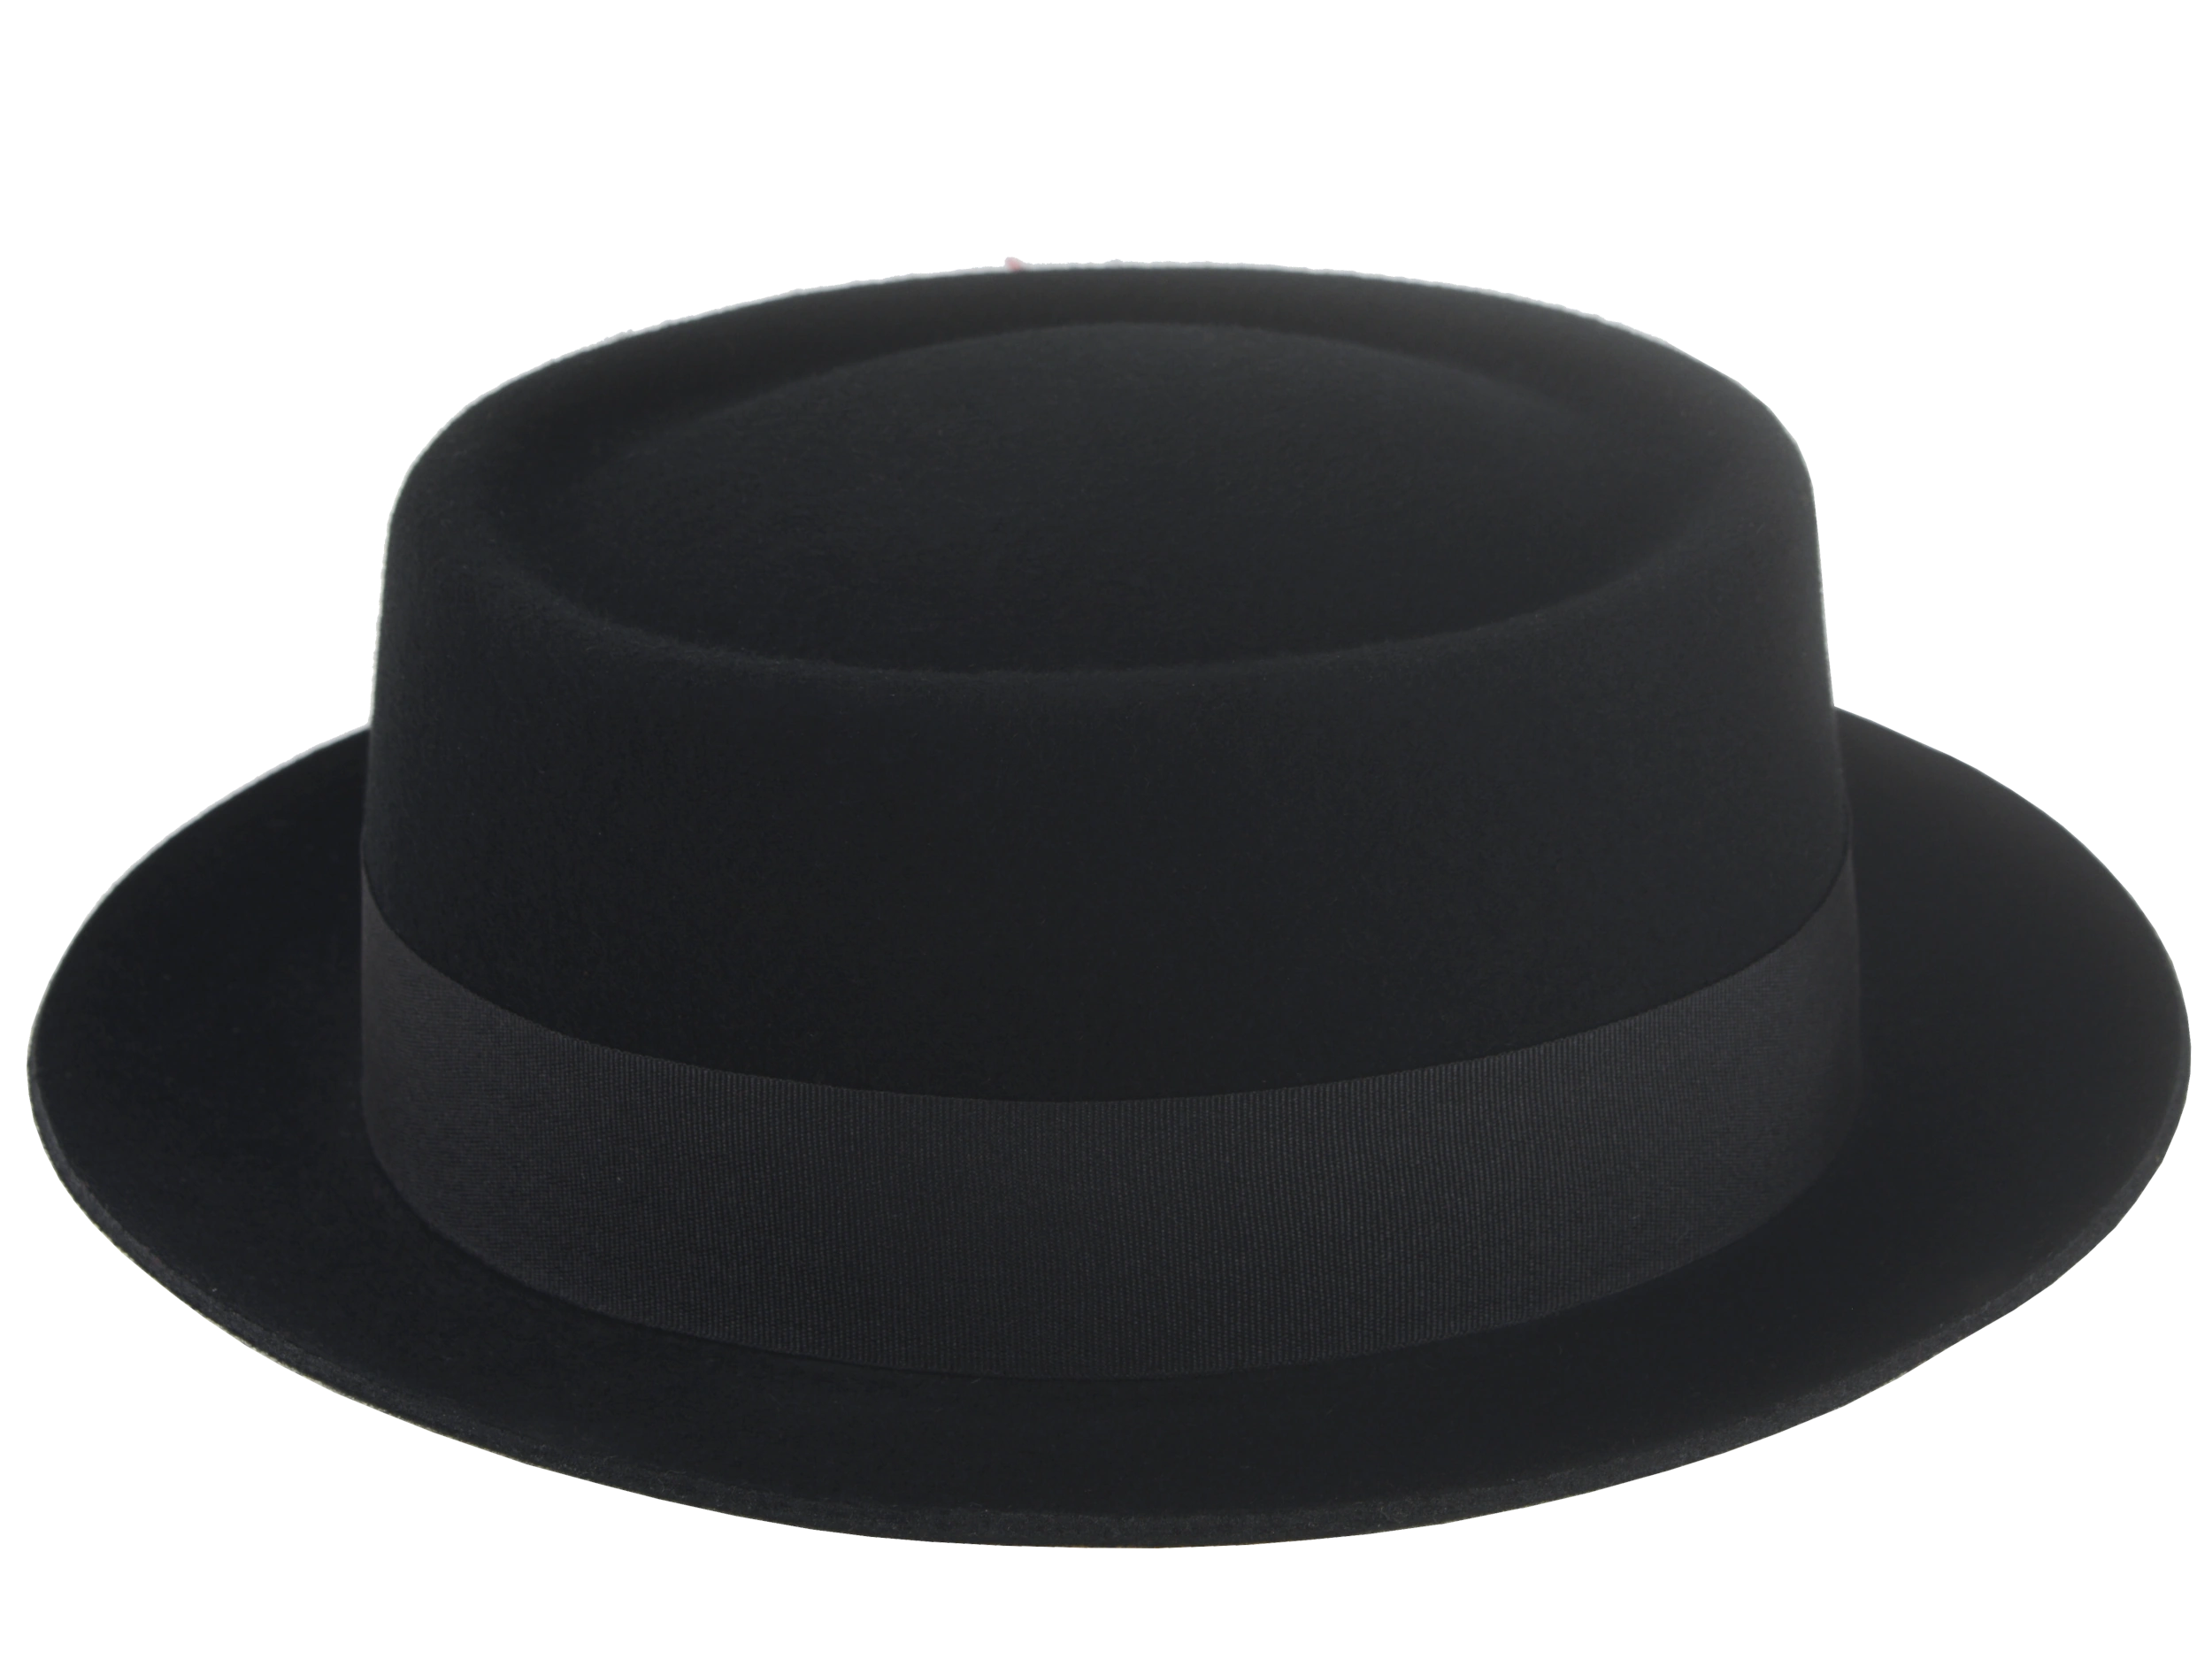 The Jazzist - Premium Wool Felt Porkpie Fedora For Men or Women with Feather in Black White and Red Color | Agnoulita Quality Custom Hats 5